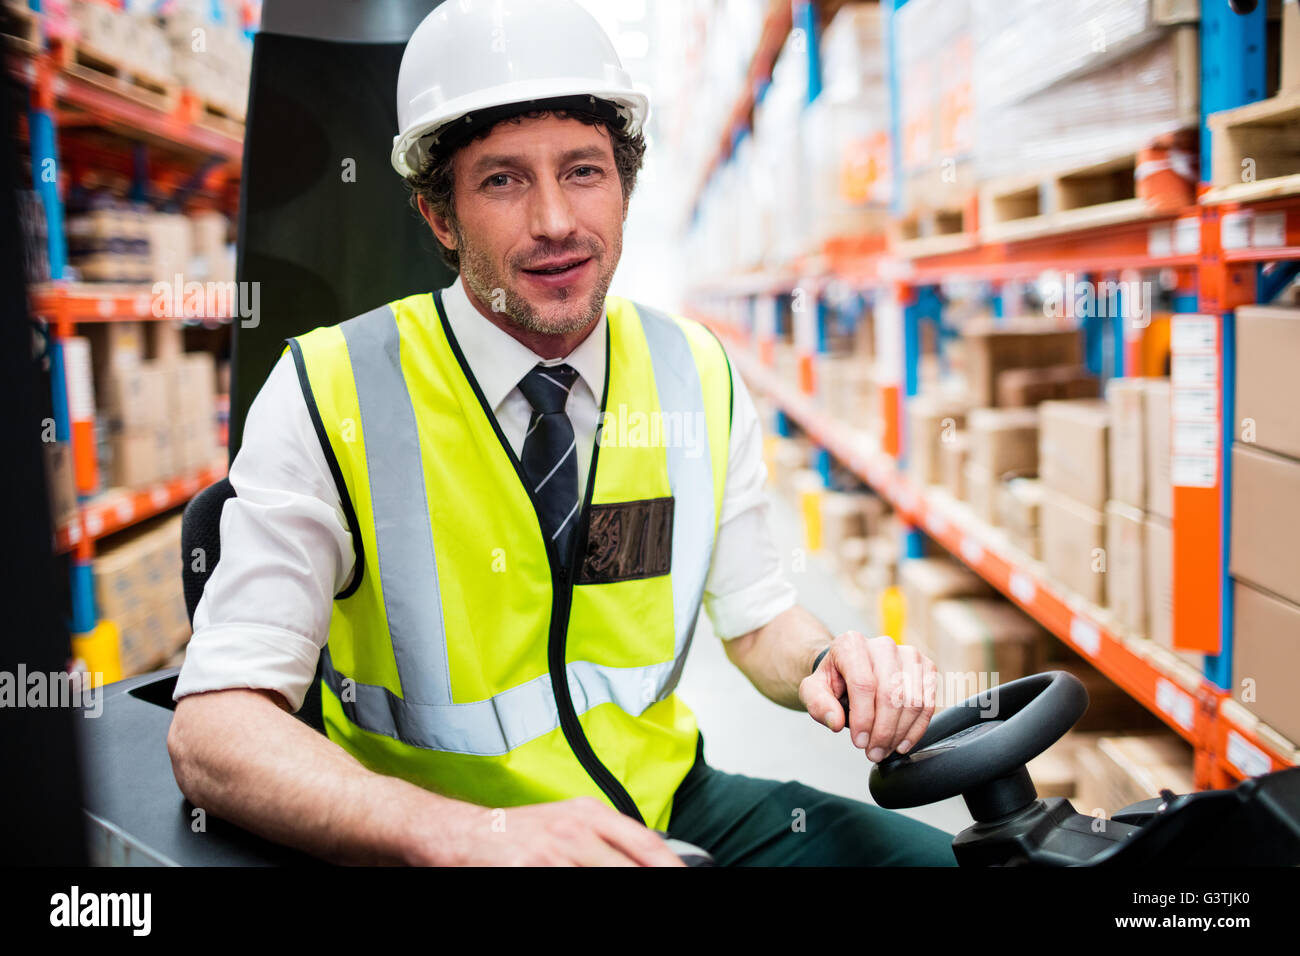 Portrait of a warehouse manager using a forklift Stock Photo